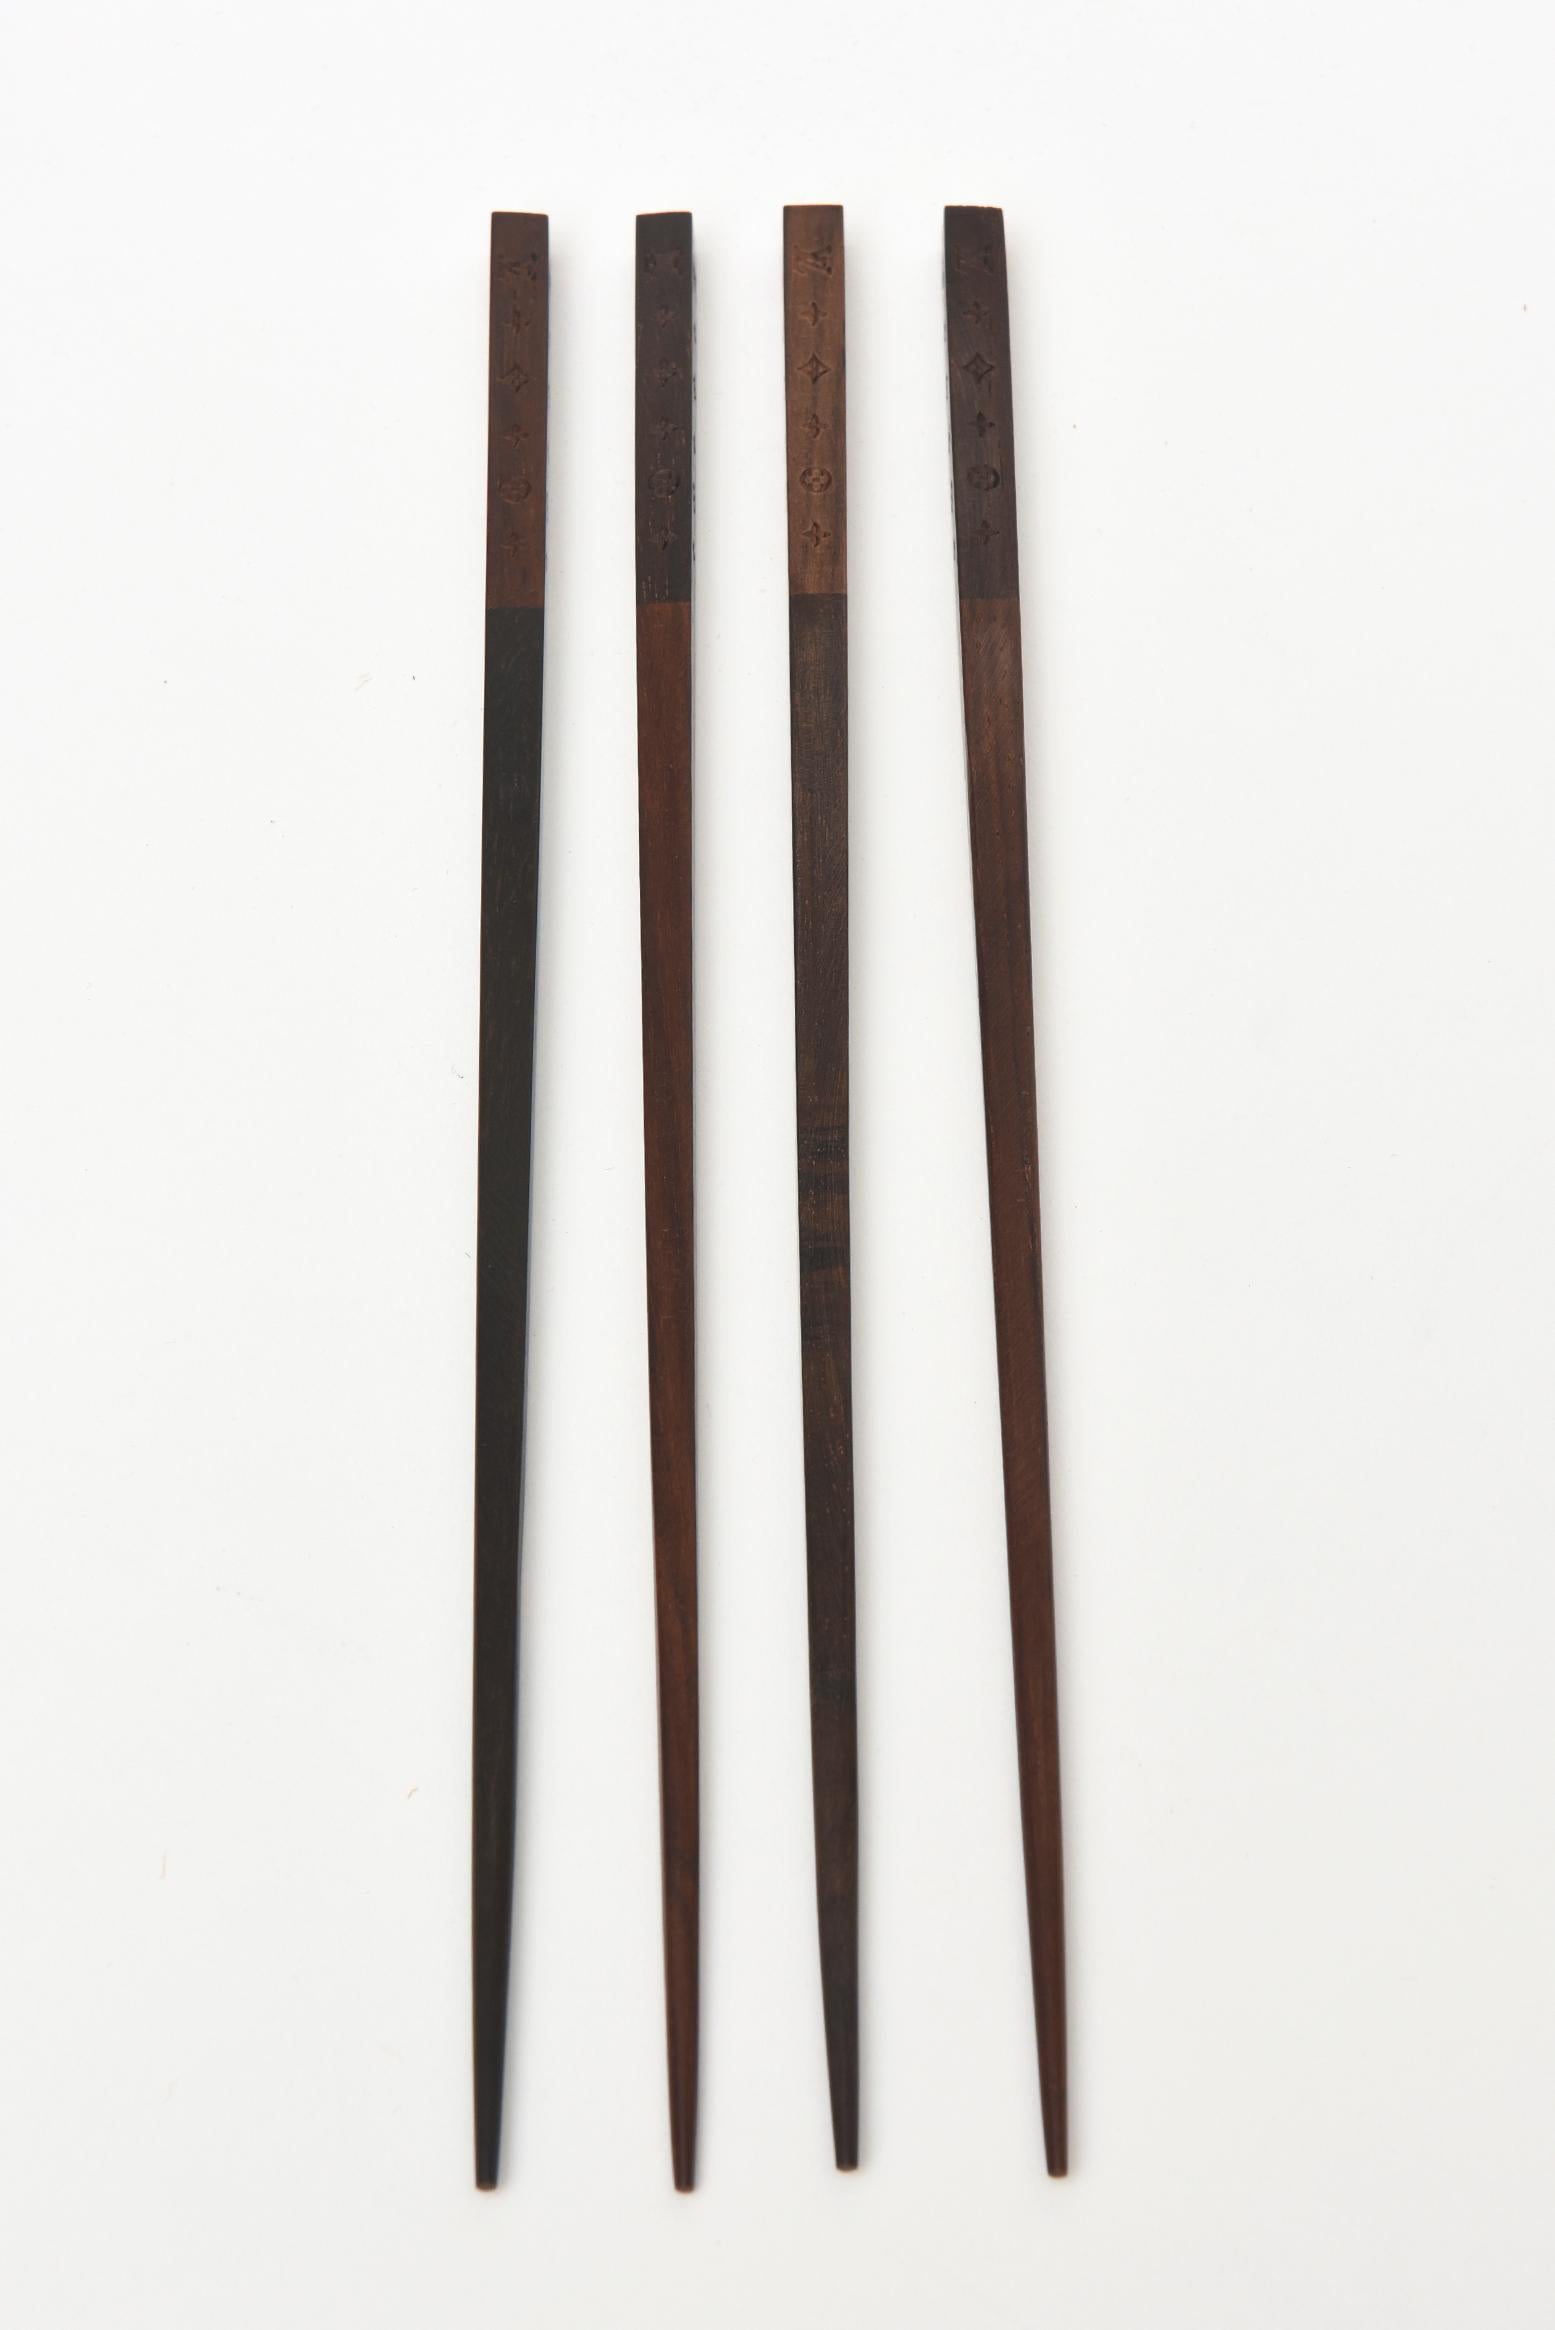 Leather Louis Vuitton Set of Rosewood Monogrammed Chopsticks Set for Two Barware